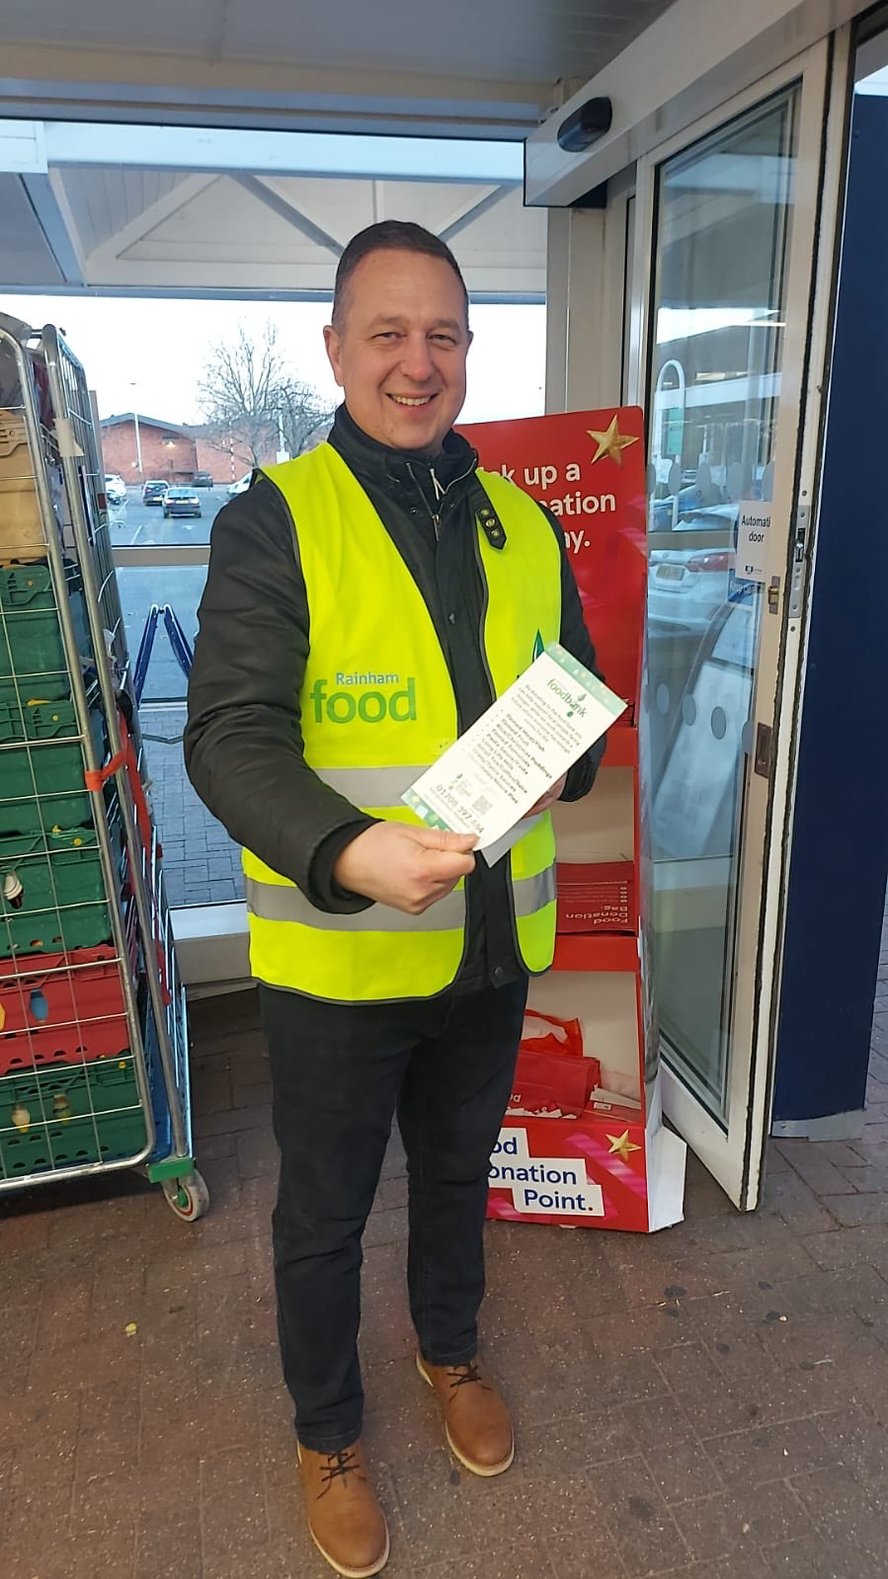 Richard Tant, HR Manager from IE handing out leaflets at the local Tesco